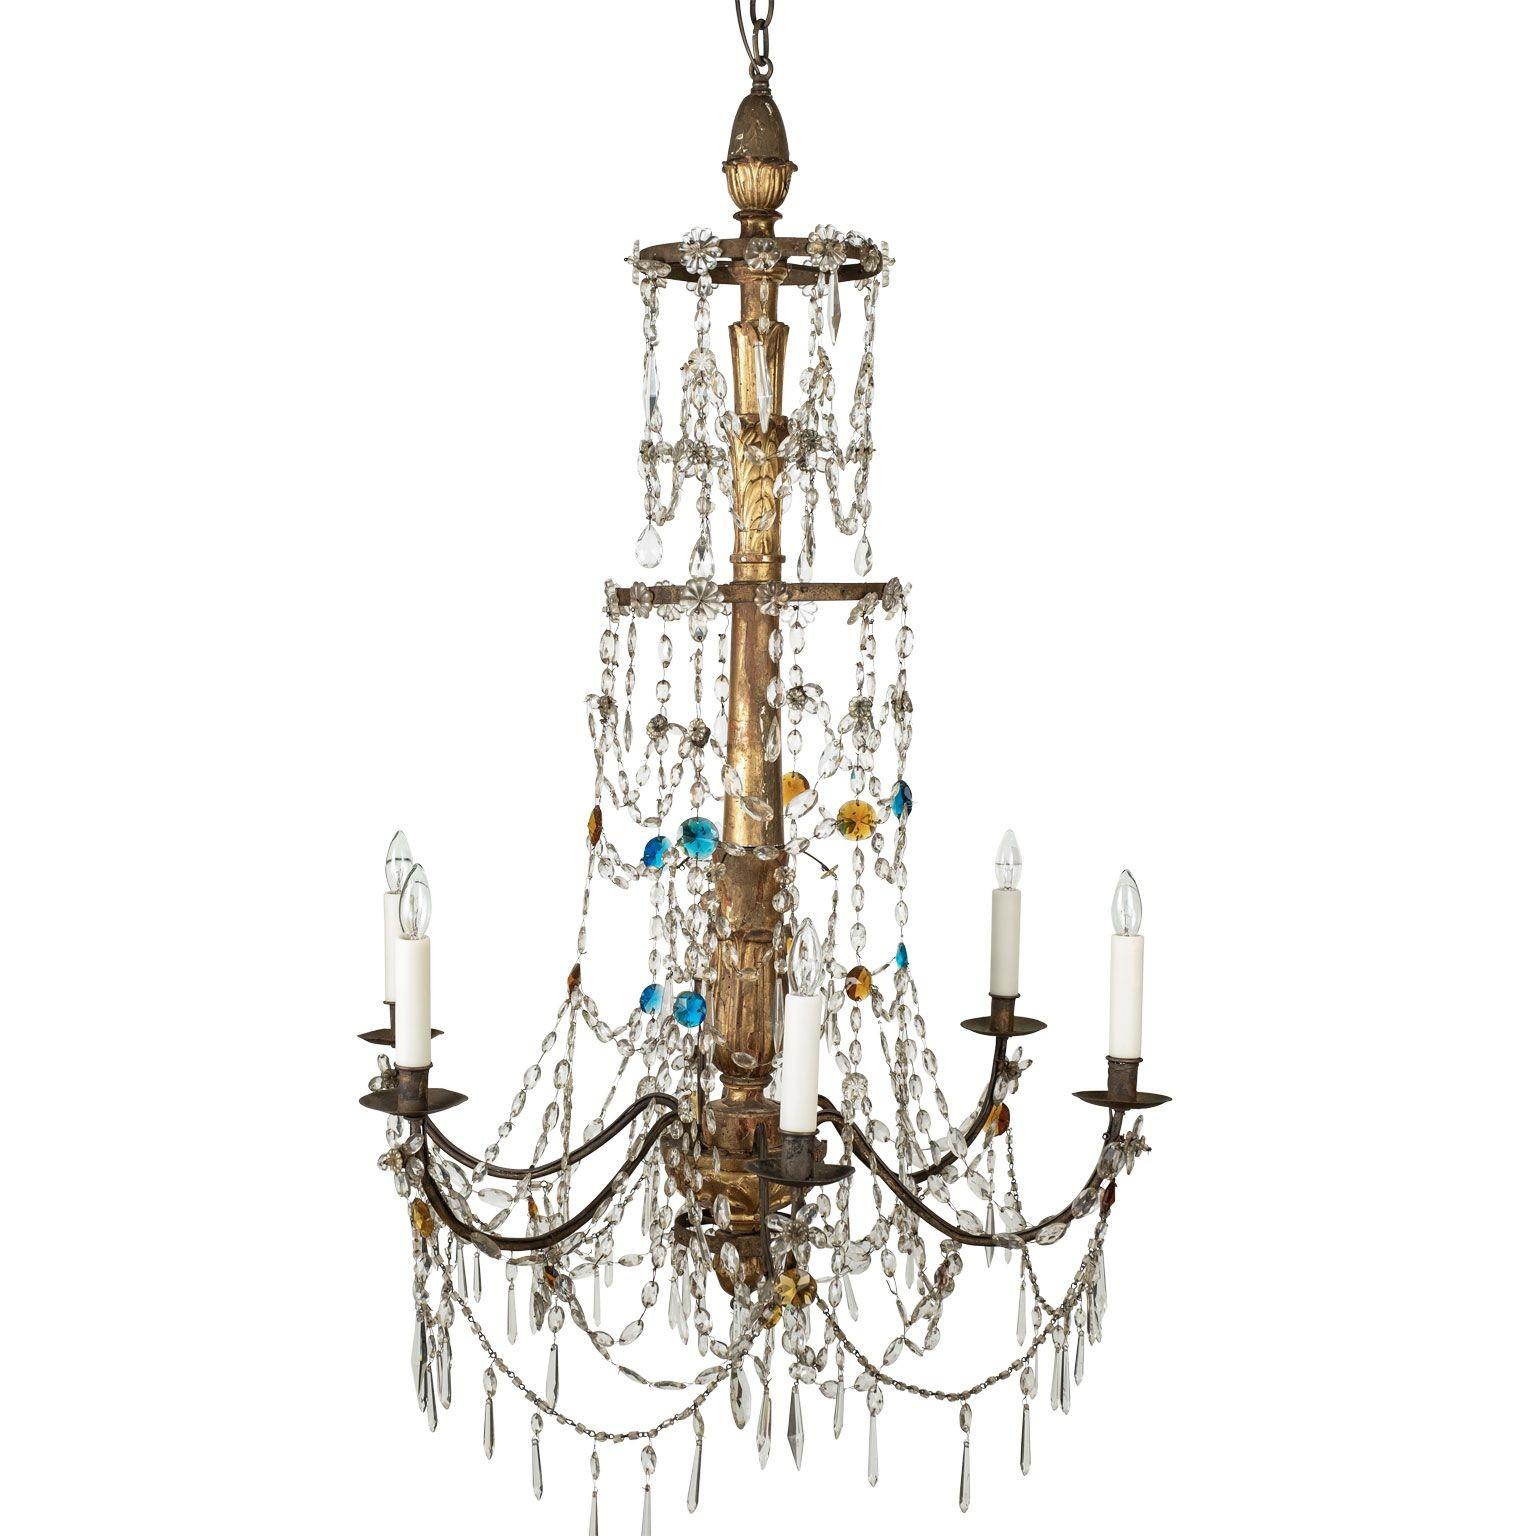 Early 19th century Genoese chandelier consisting of a carved giltwood body, original eight iron arms and three tiers of original crystal prisms (clear and colored). This chandelier includes extra chain, a matching canopy and is newly-wired for use